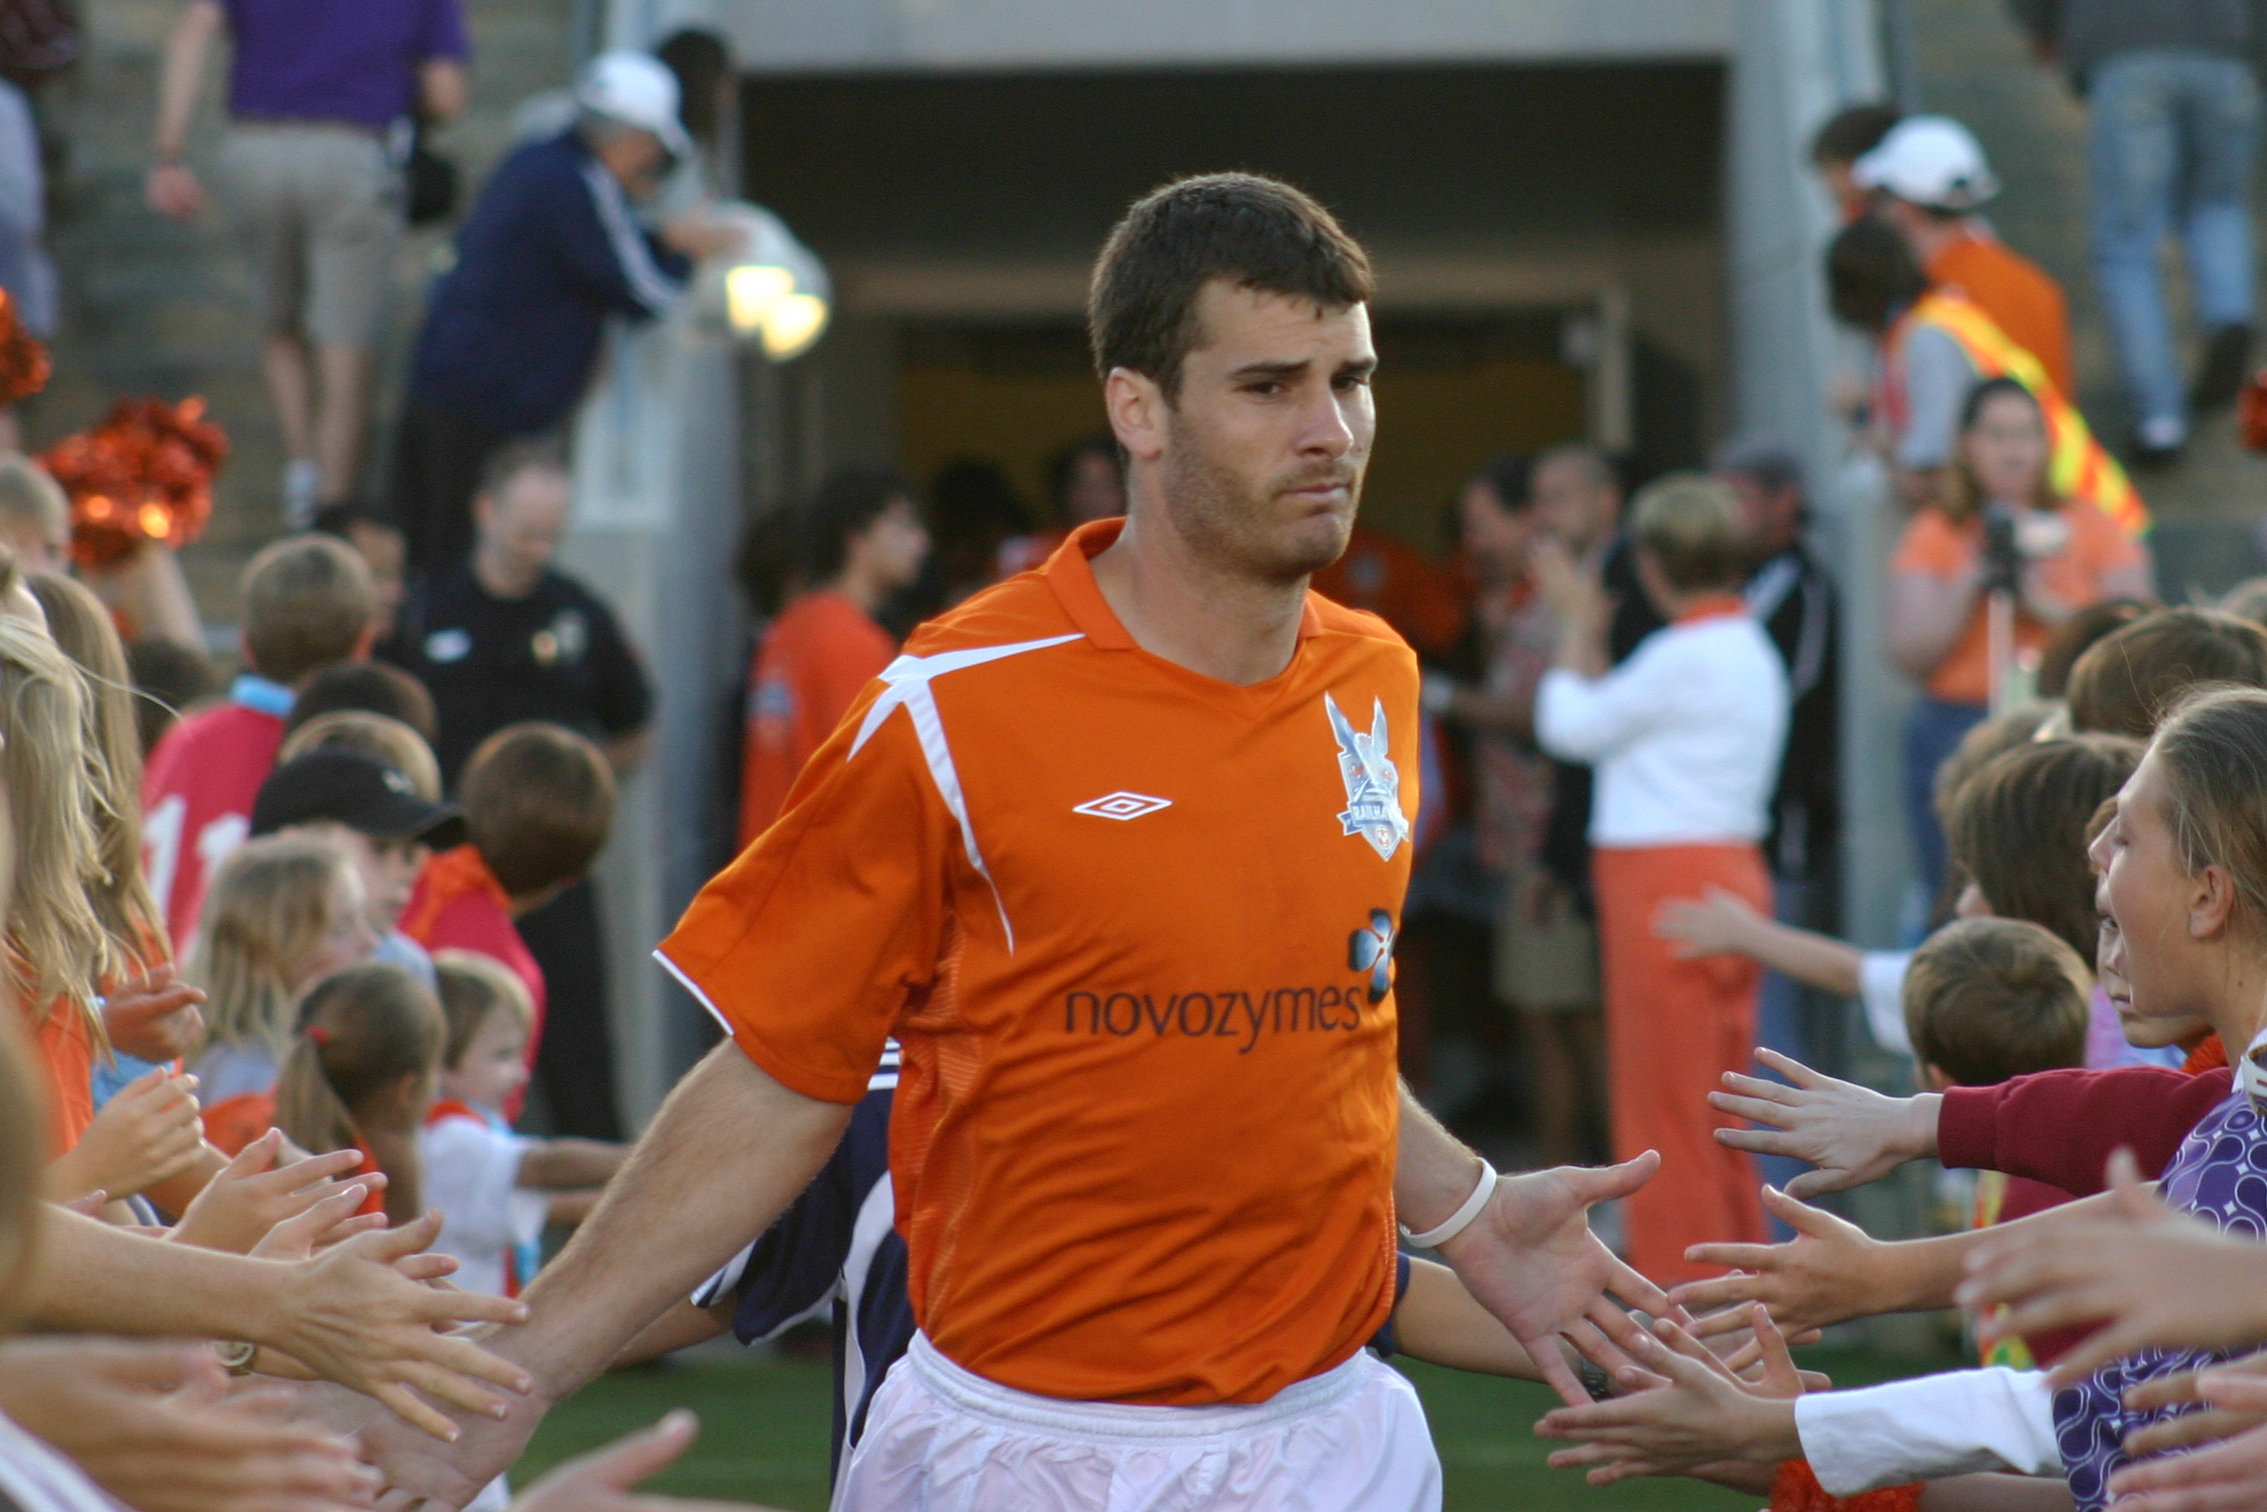 a man wearing an orange uniform standing in front of lots of people